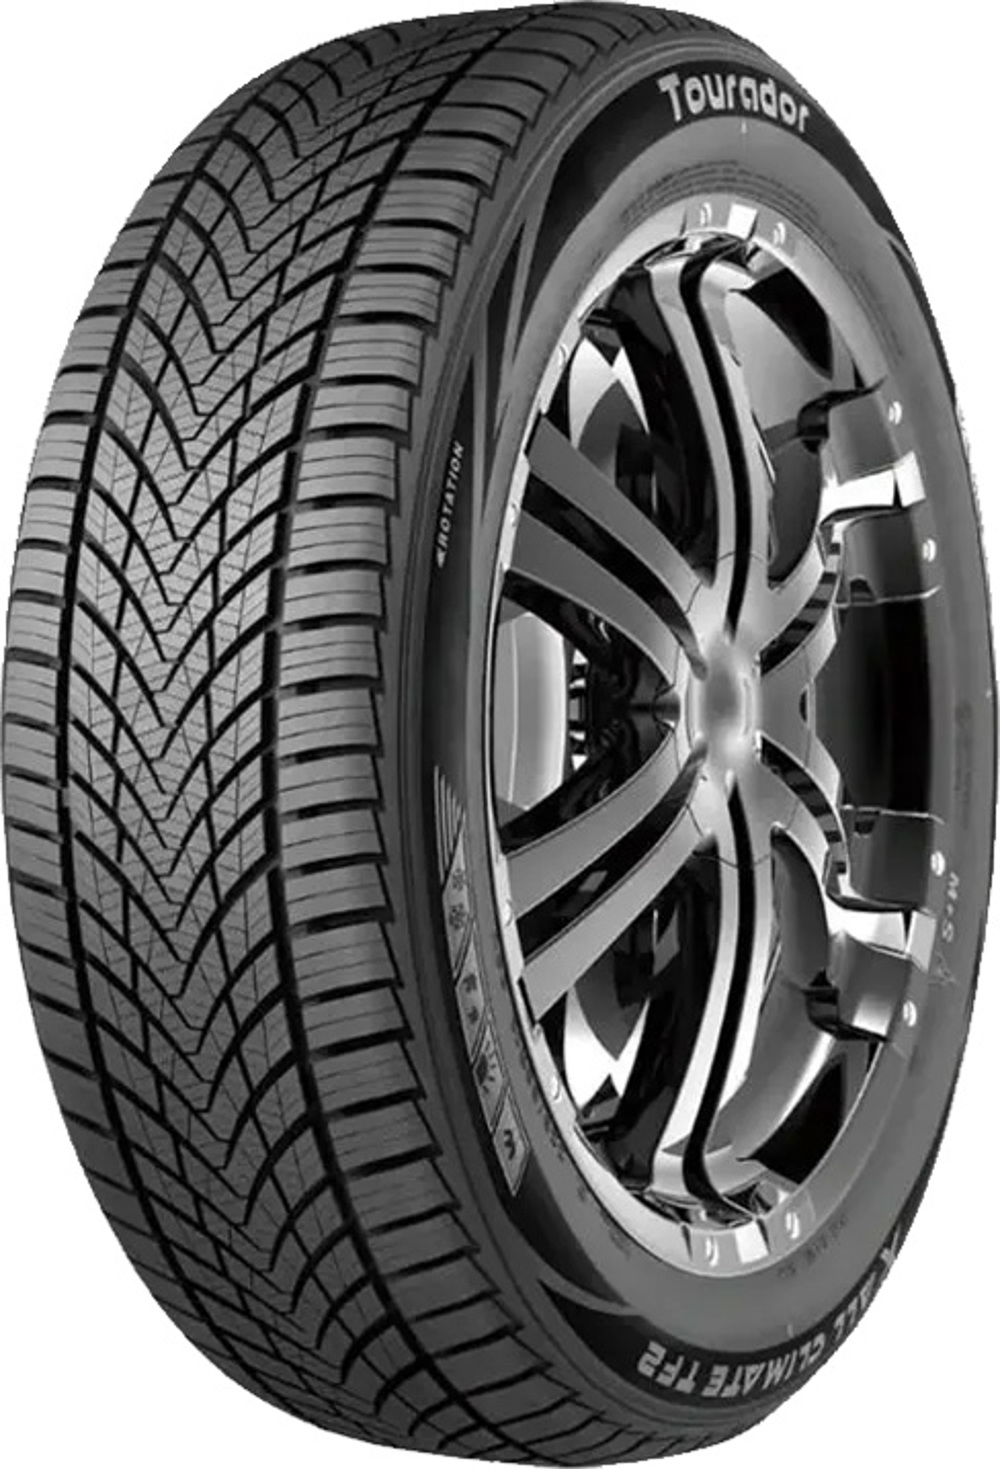 Gomme Nuove Tourador 175/65 R14 86T X ALL CLIMATE TF2 XL M+S pneumatici nuovi All Season